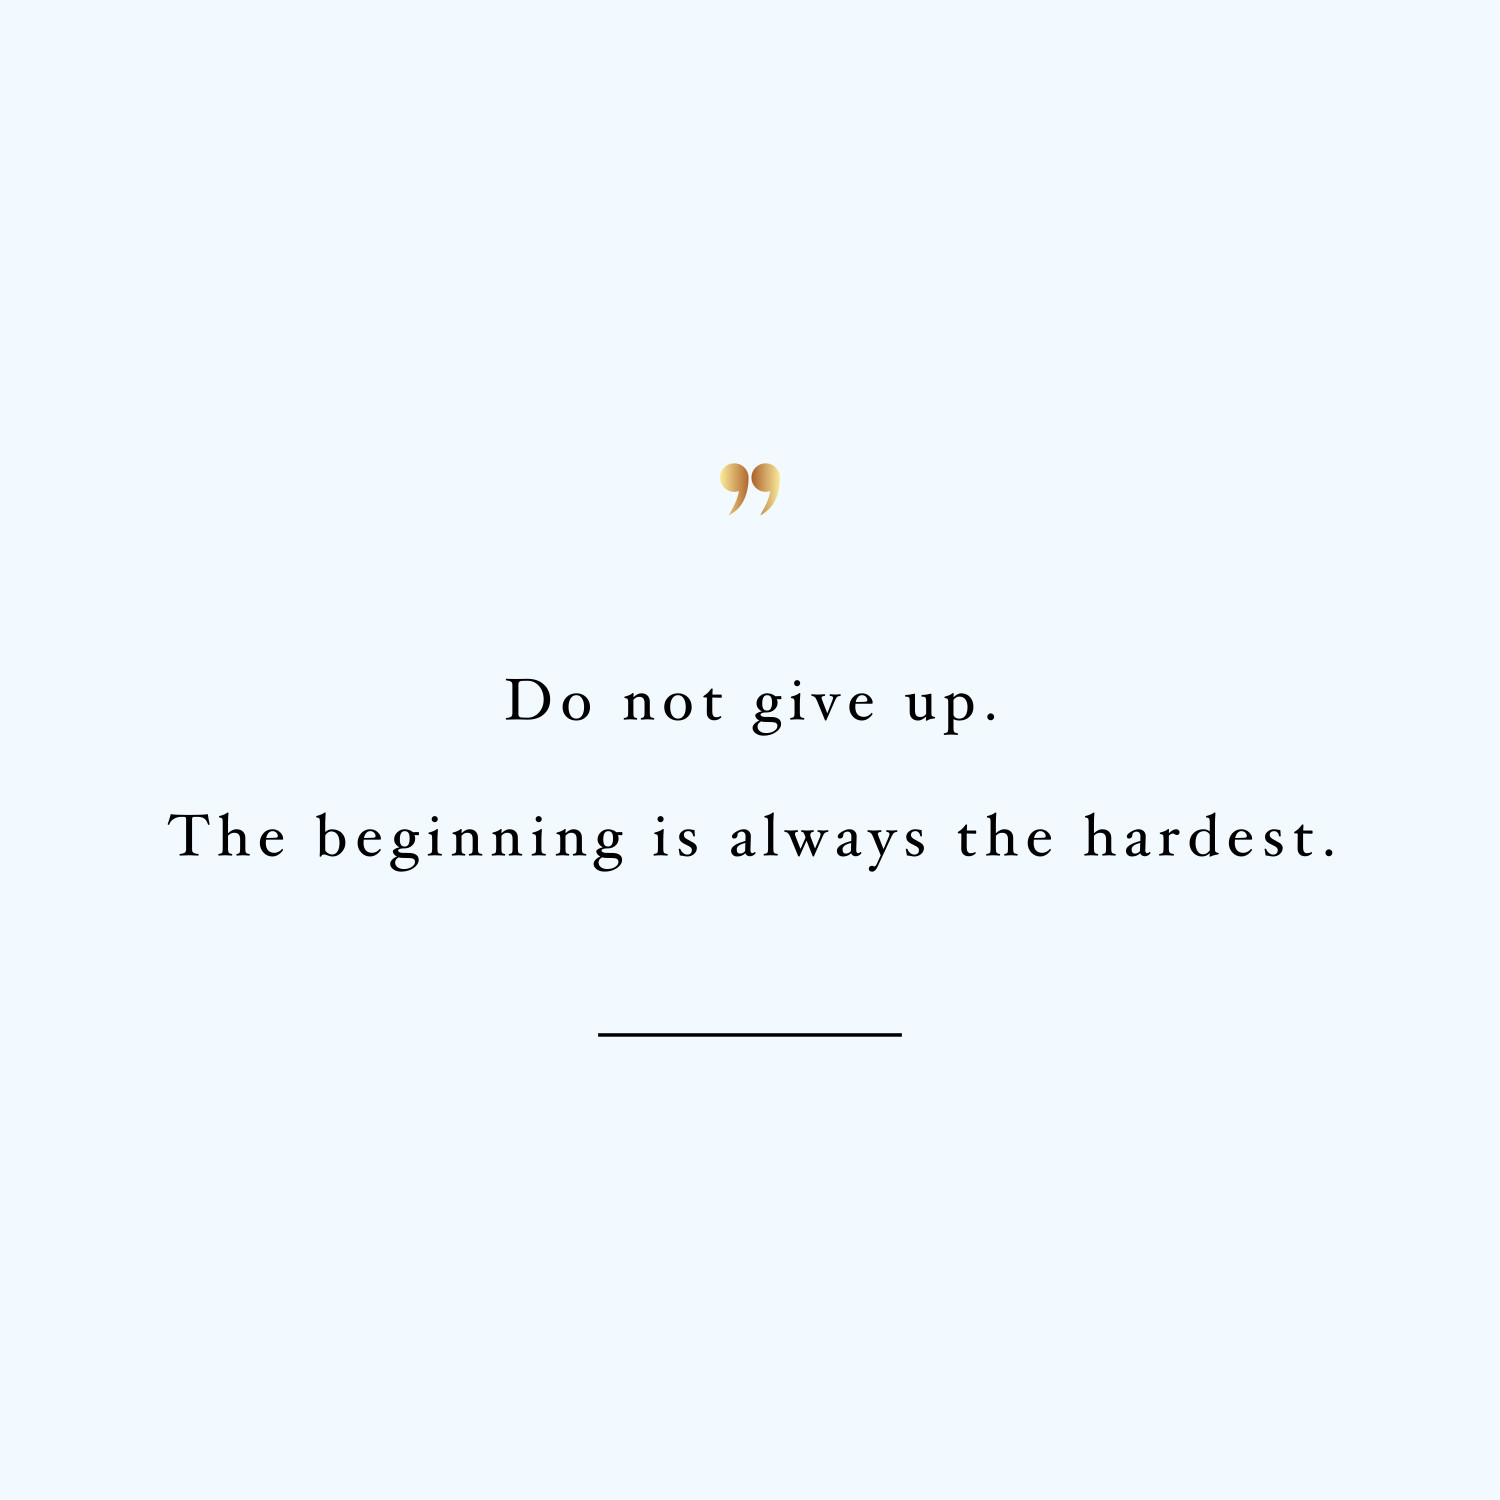 The beginning is the hardest! Browse our collection of inspirational training quotes and get instant exercise and weight loss motivation. Transform positive thoughts into positive actions and get fit, healthy and happy! https://www.spotebi.com/workout-motivation/beginning-is-hardest-inspirational-training-quote/